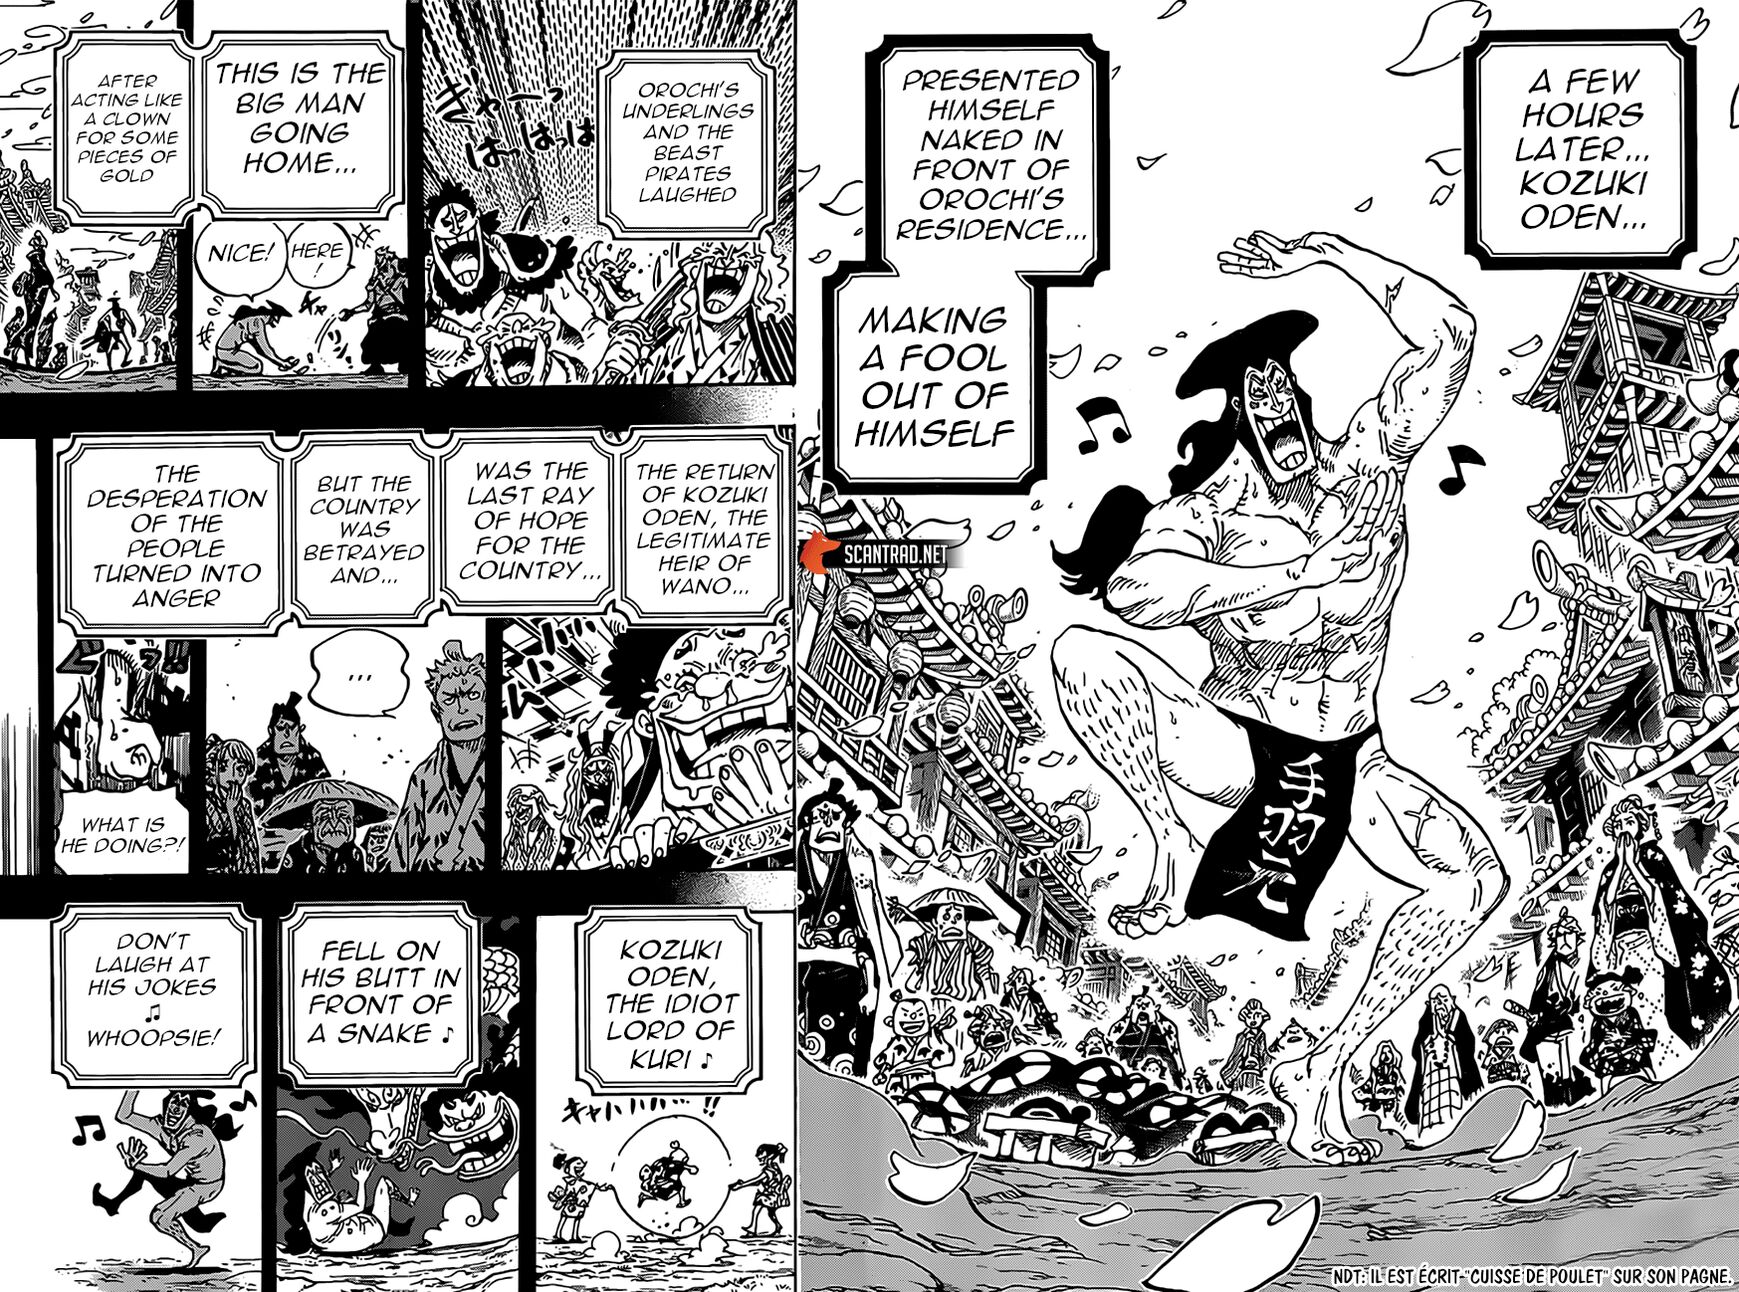 One Piece, Chapter 969 - Vol.69 Ch.969 image 07